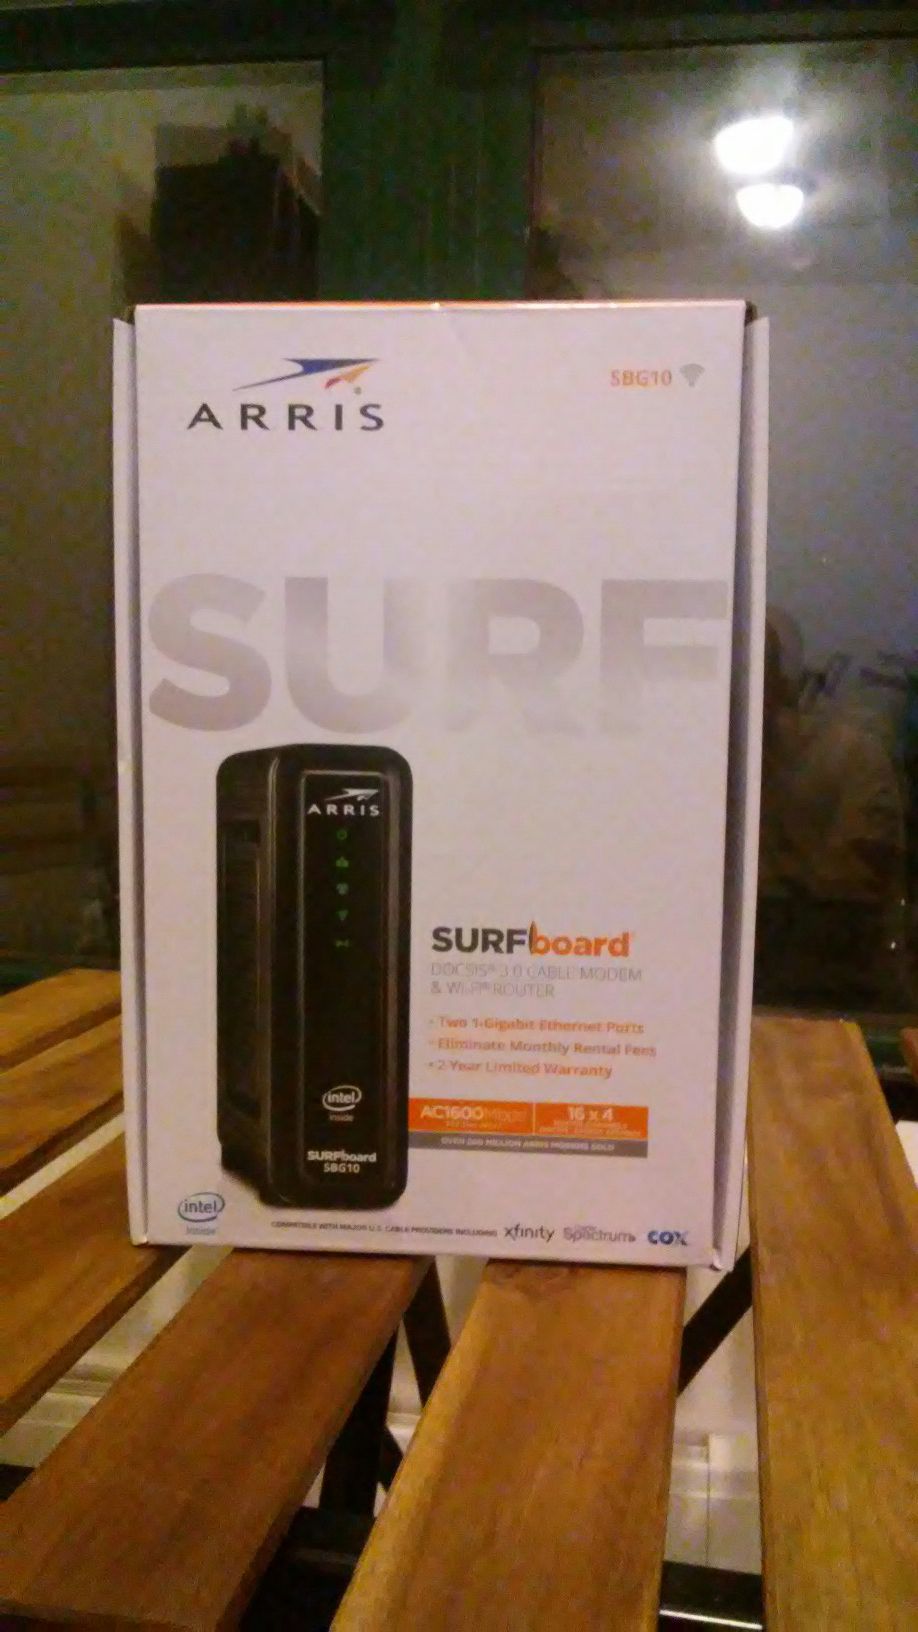 2-in-1 Arris Surfboard SBG10 Cable Modem & Router